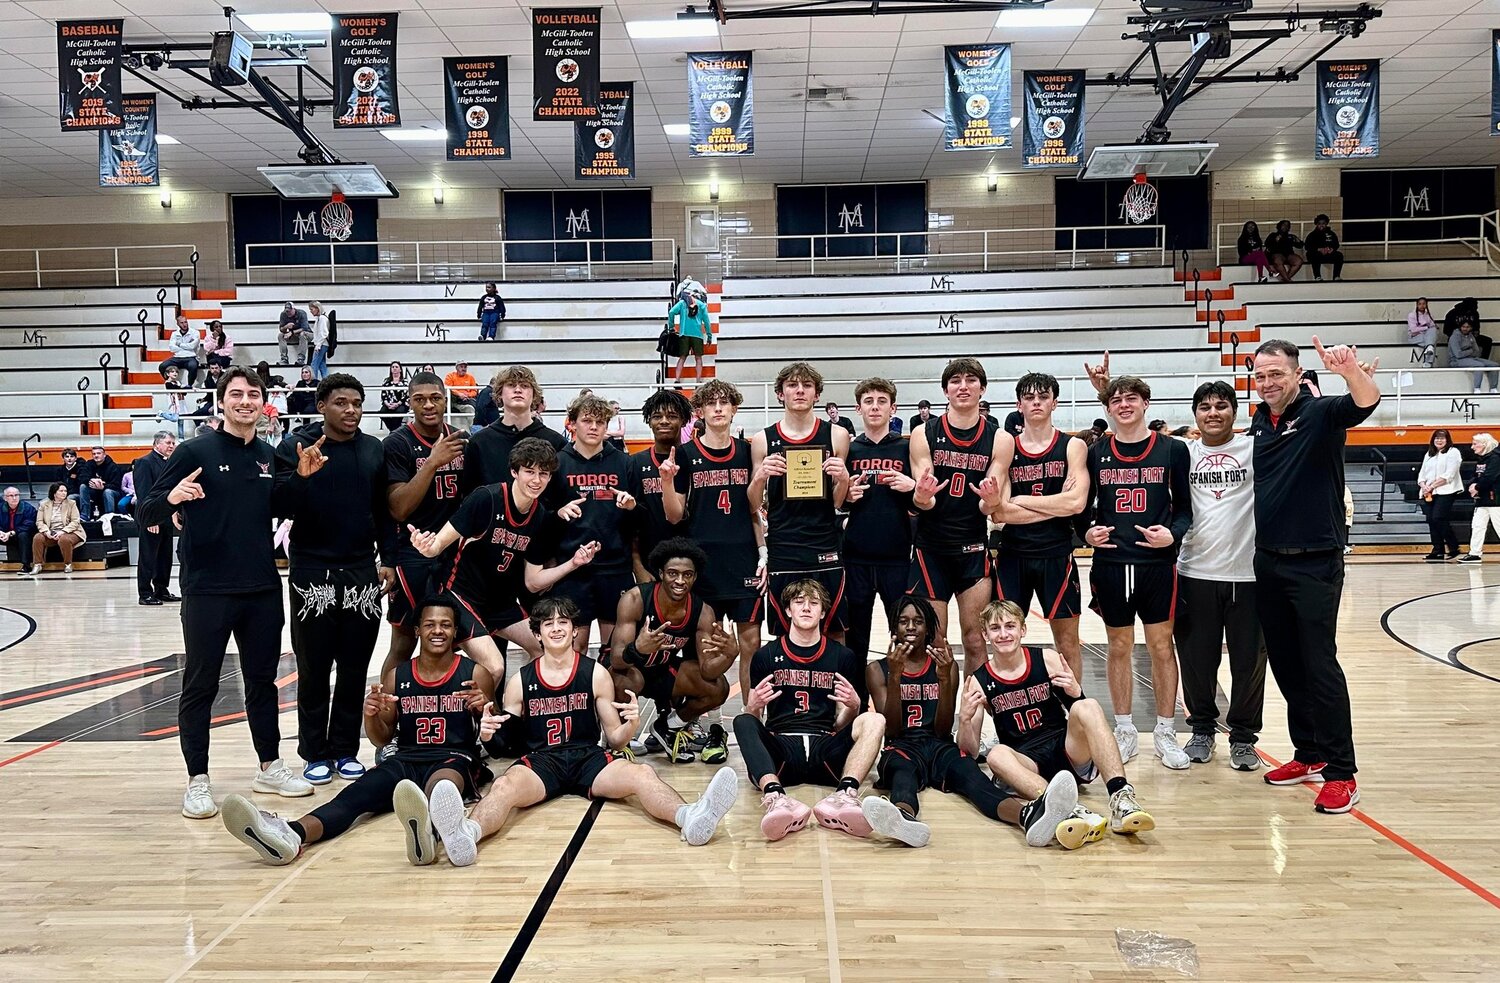 The Spanish Fort Toro boys’ team went on the road and earned the Class 6A Area 2 title with a 68-42 win over the McGill-Toolen Yellow Jackets on Wednesday, Feb. 7. In their first year under head coach Chad Applin, the Toros didn’t skip a beat and enters the sub-regional round as a top seed.